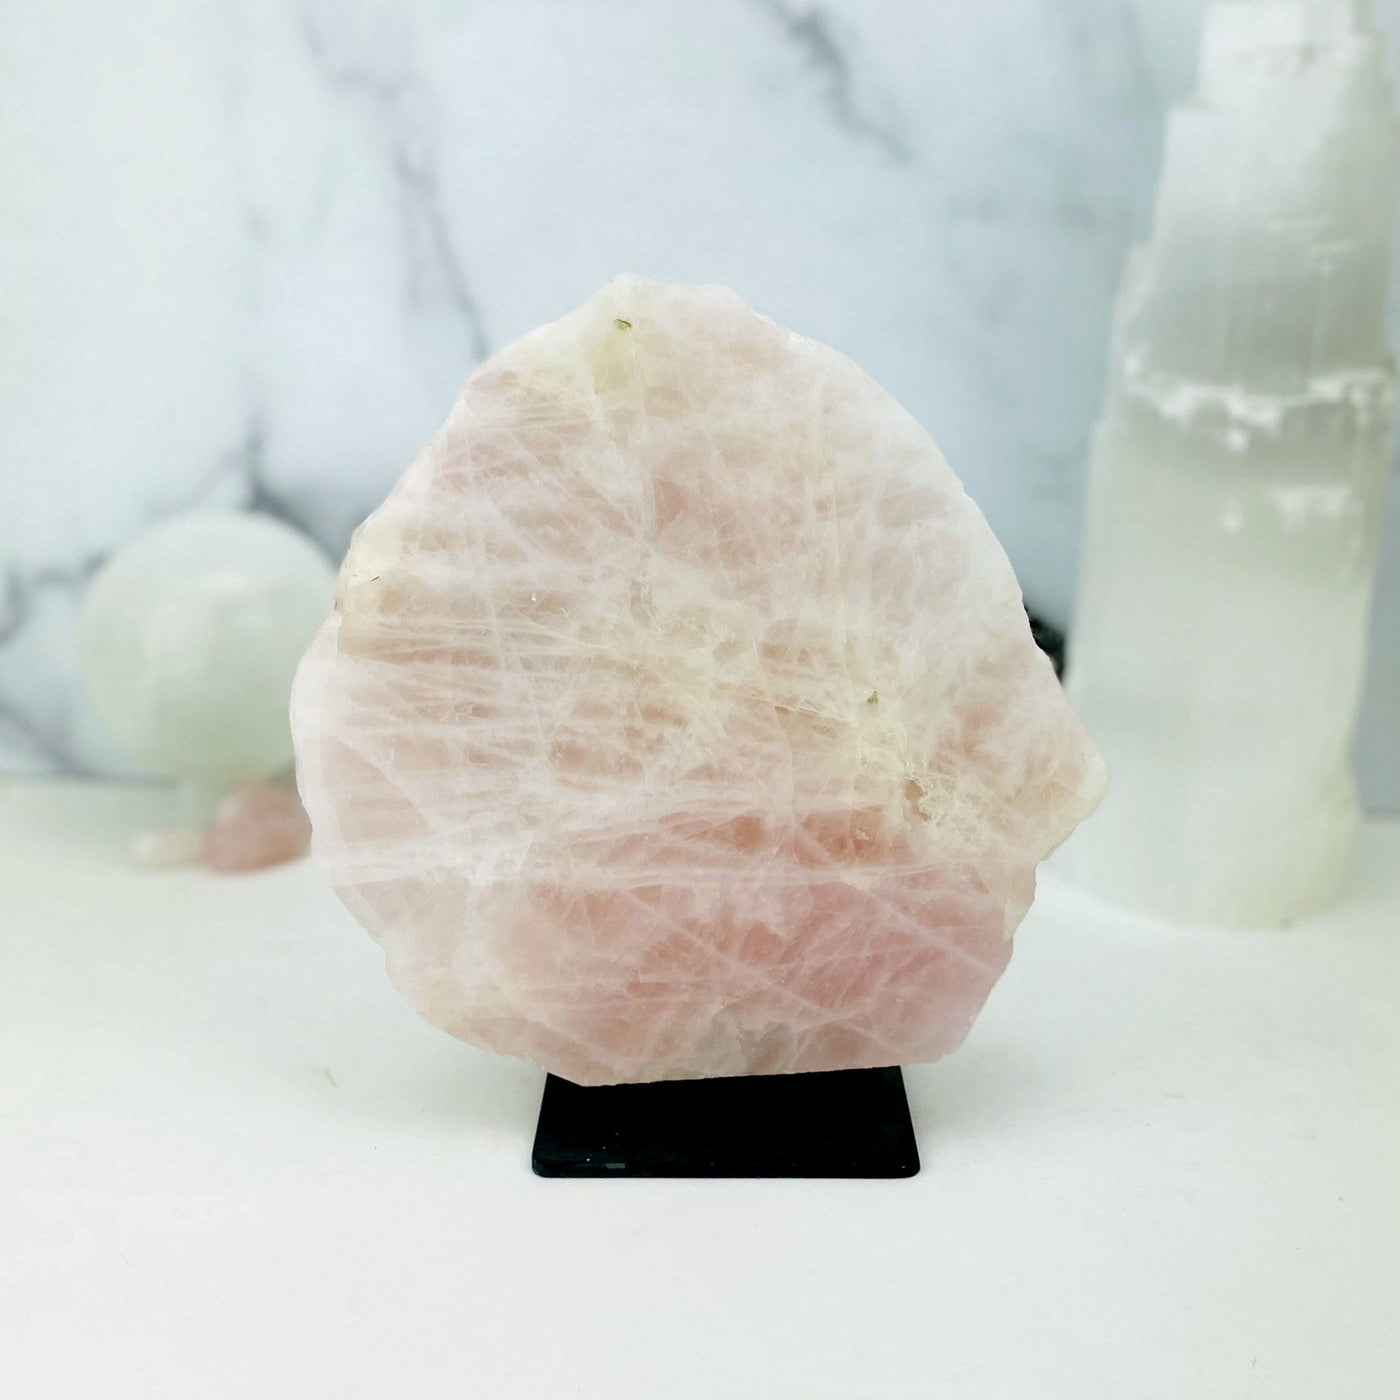 Rose Quartz on Metal Stand with other crystals blurred on marble background